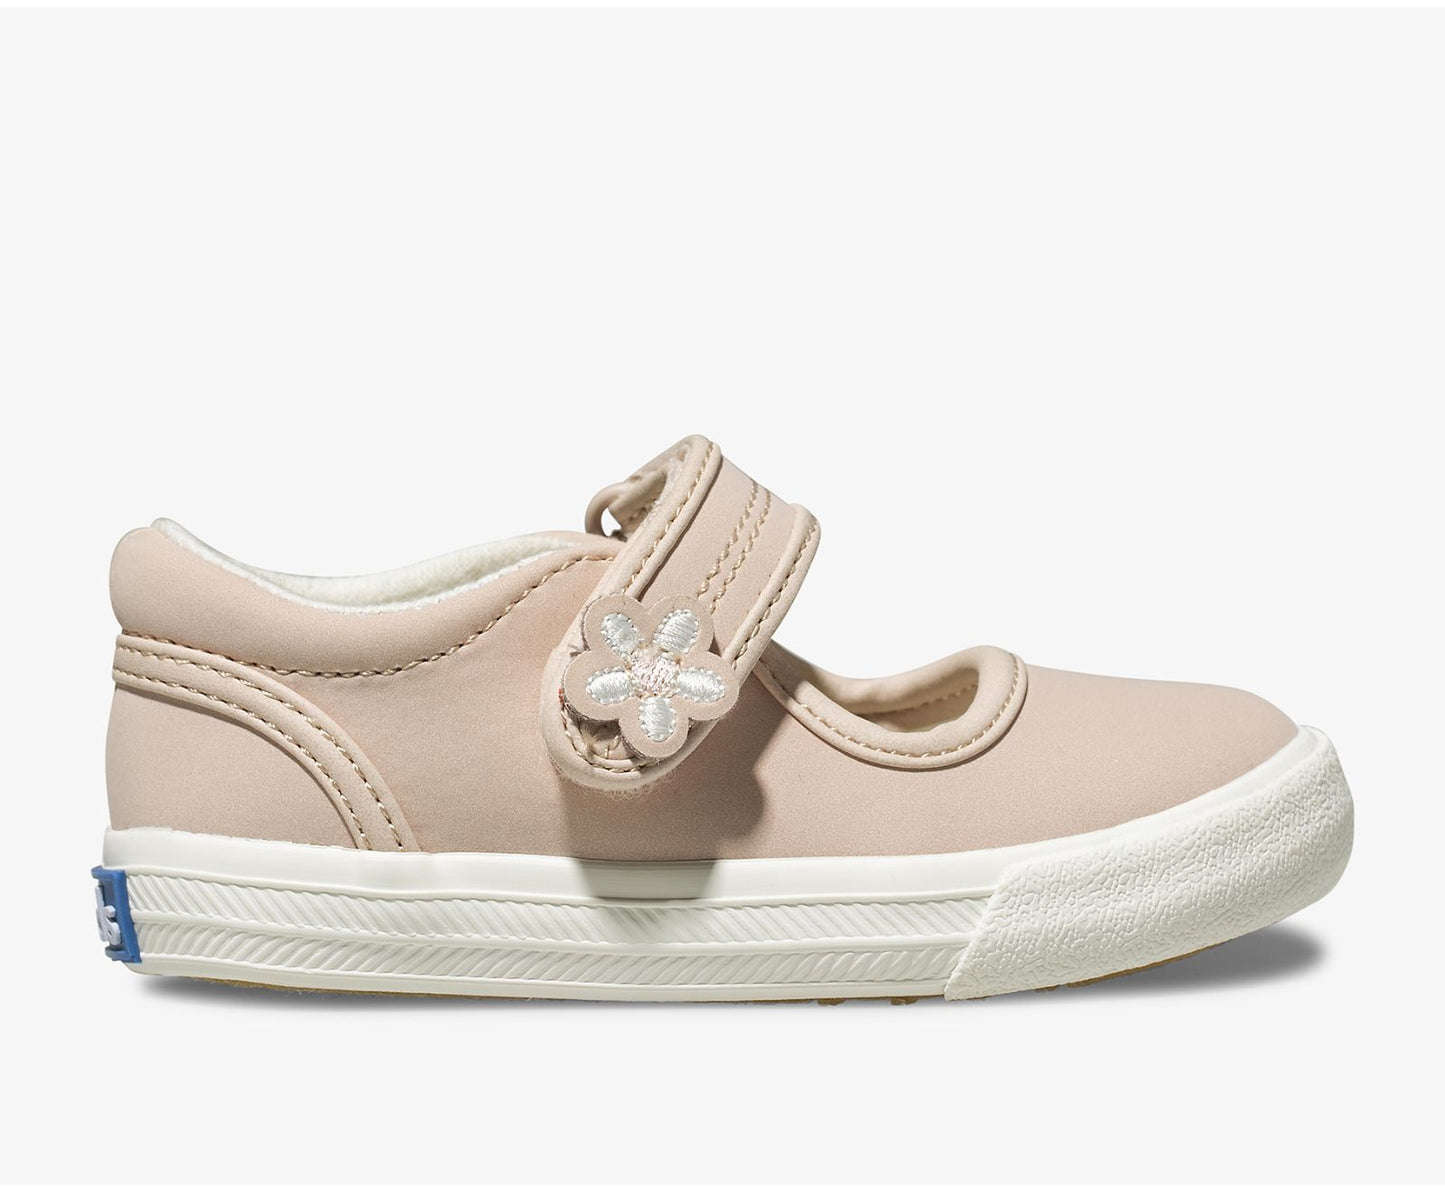 From playground to party time, Keds’ Ella is a not-so-plain Mary Jane. Featuring a sweet flower detail on the convenient hook & loop closure, plus a memory foam footbed and deep flex grooves making them as comfy as a sneaker, but perfect for parties!